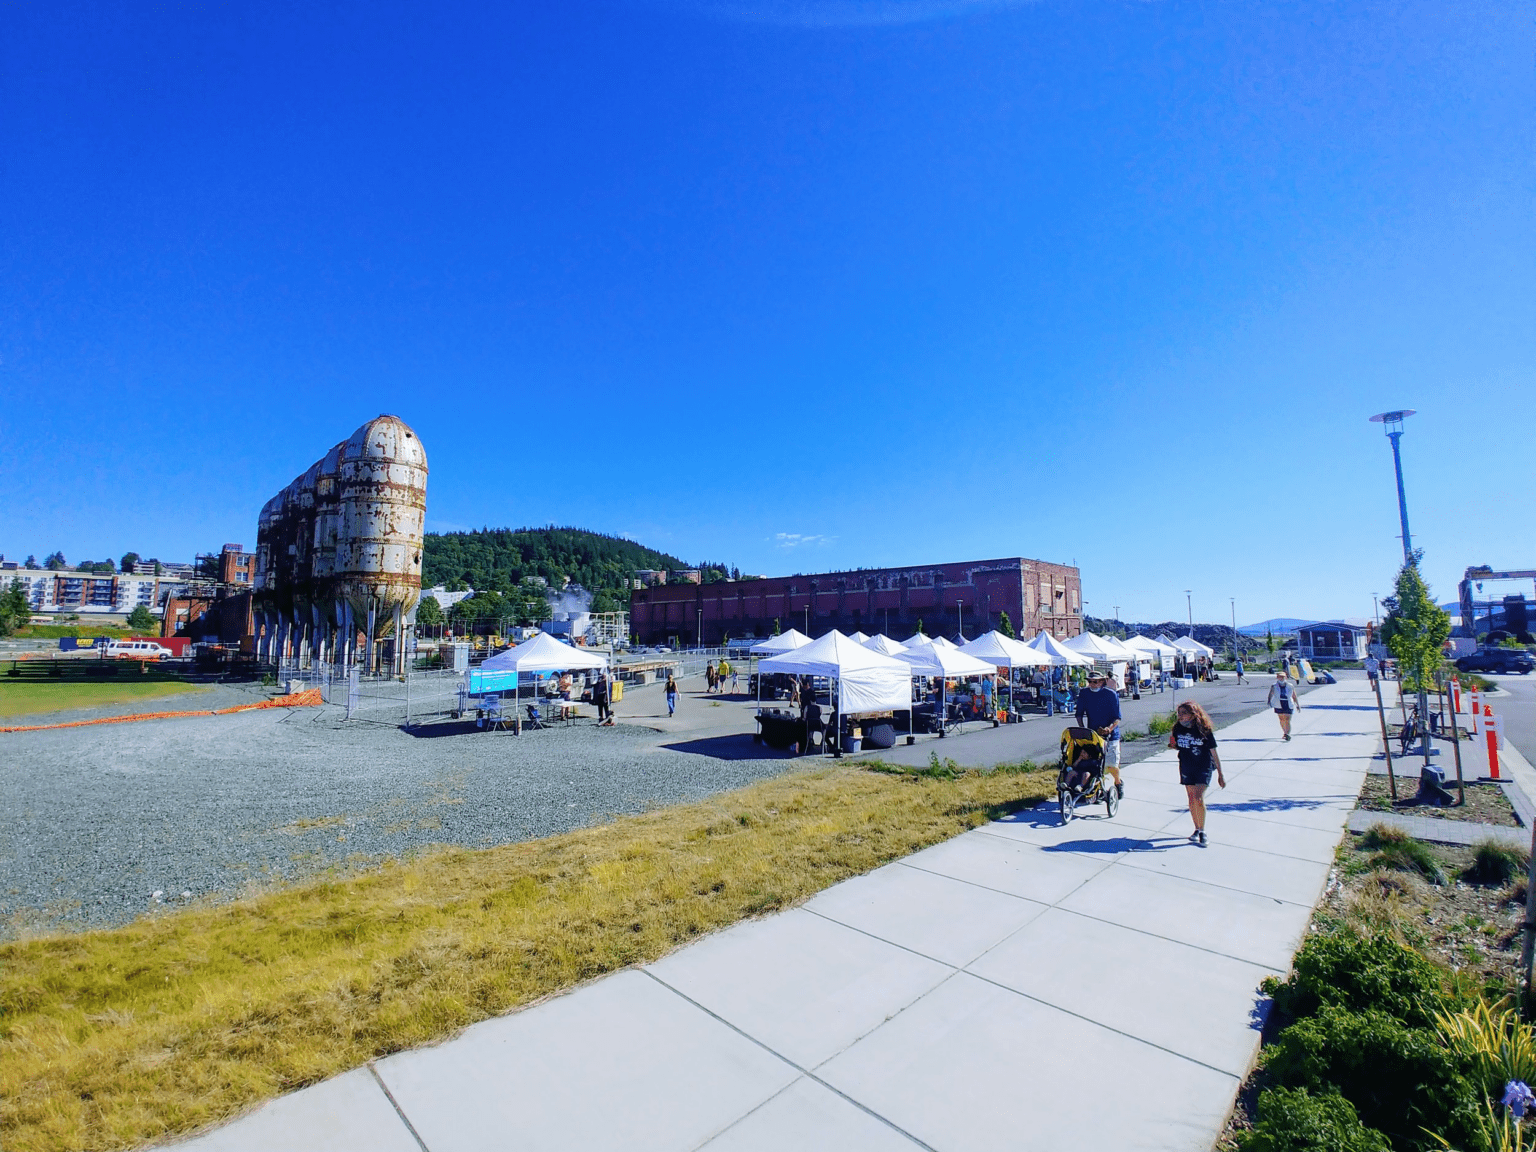 Wednesday on the Waterfront opens June 1 at Waypoint Park. The Bellingham Farmers Market offering continues from 4–7 p.m. Wednesdays through Sept. 14.